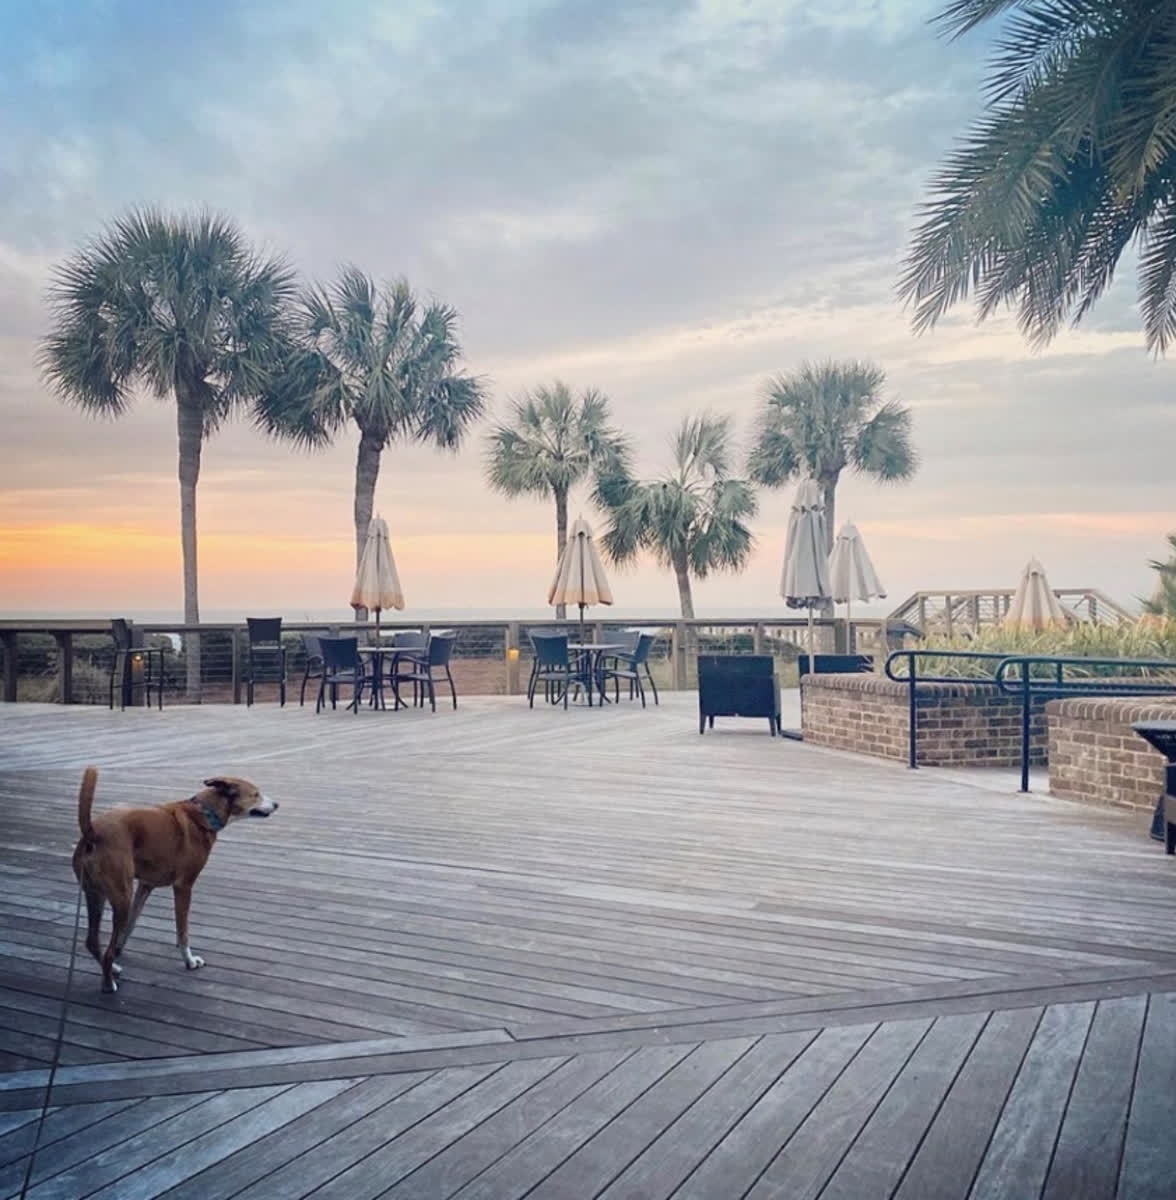 Start your weekend right with a walk to the Sea Pines Beach Club. 📸: @livingthelowcountrylife